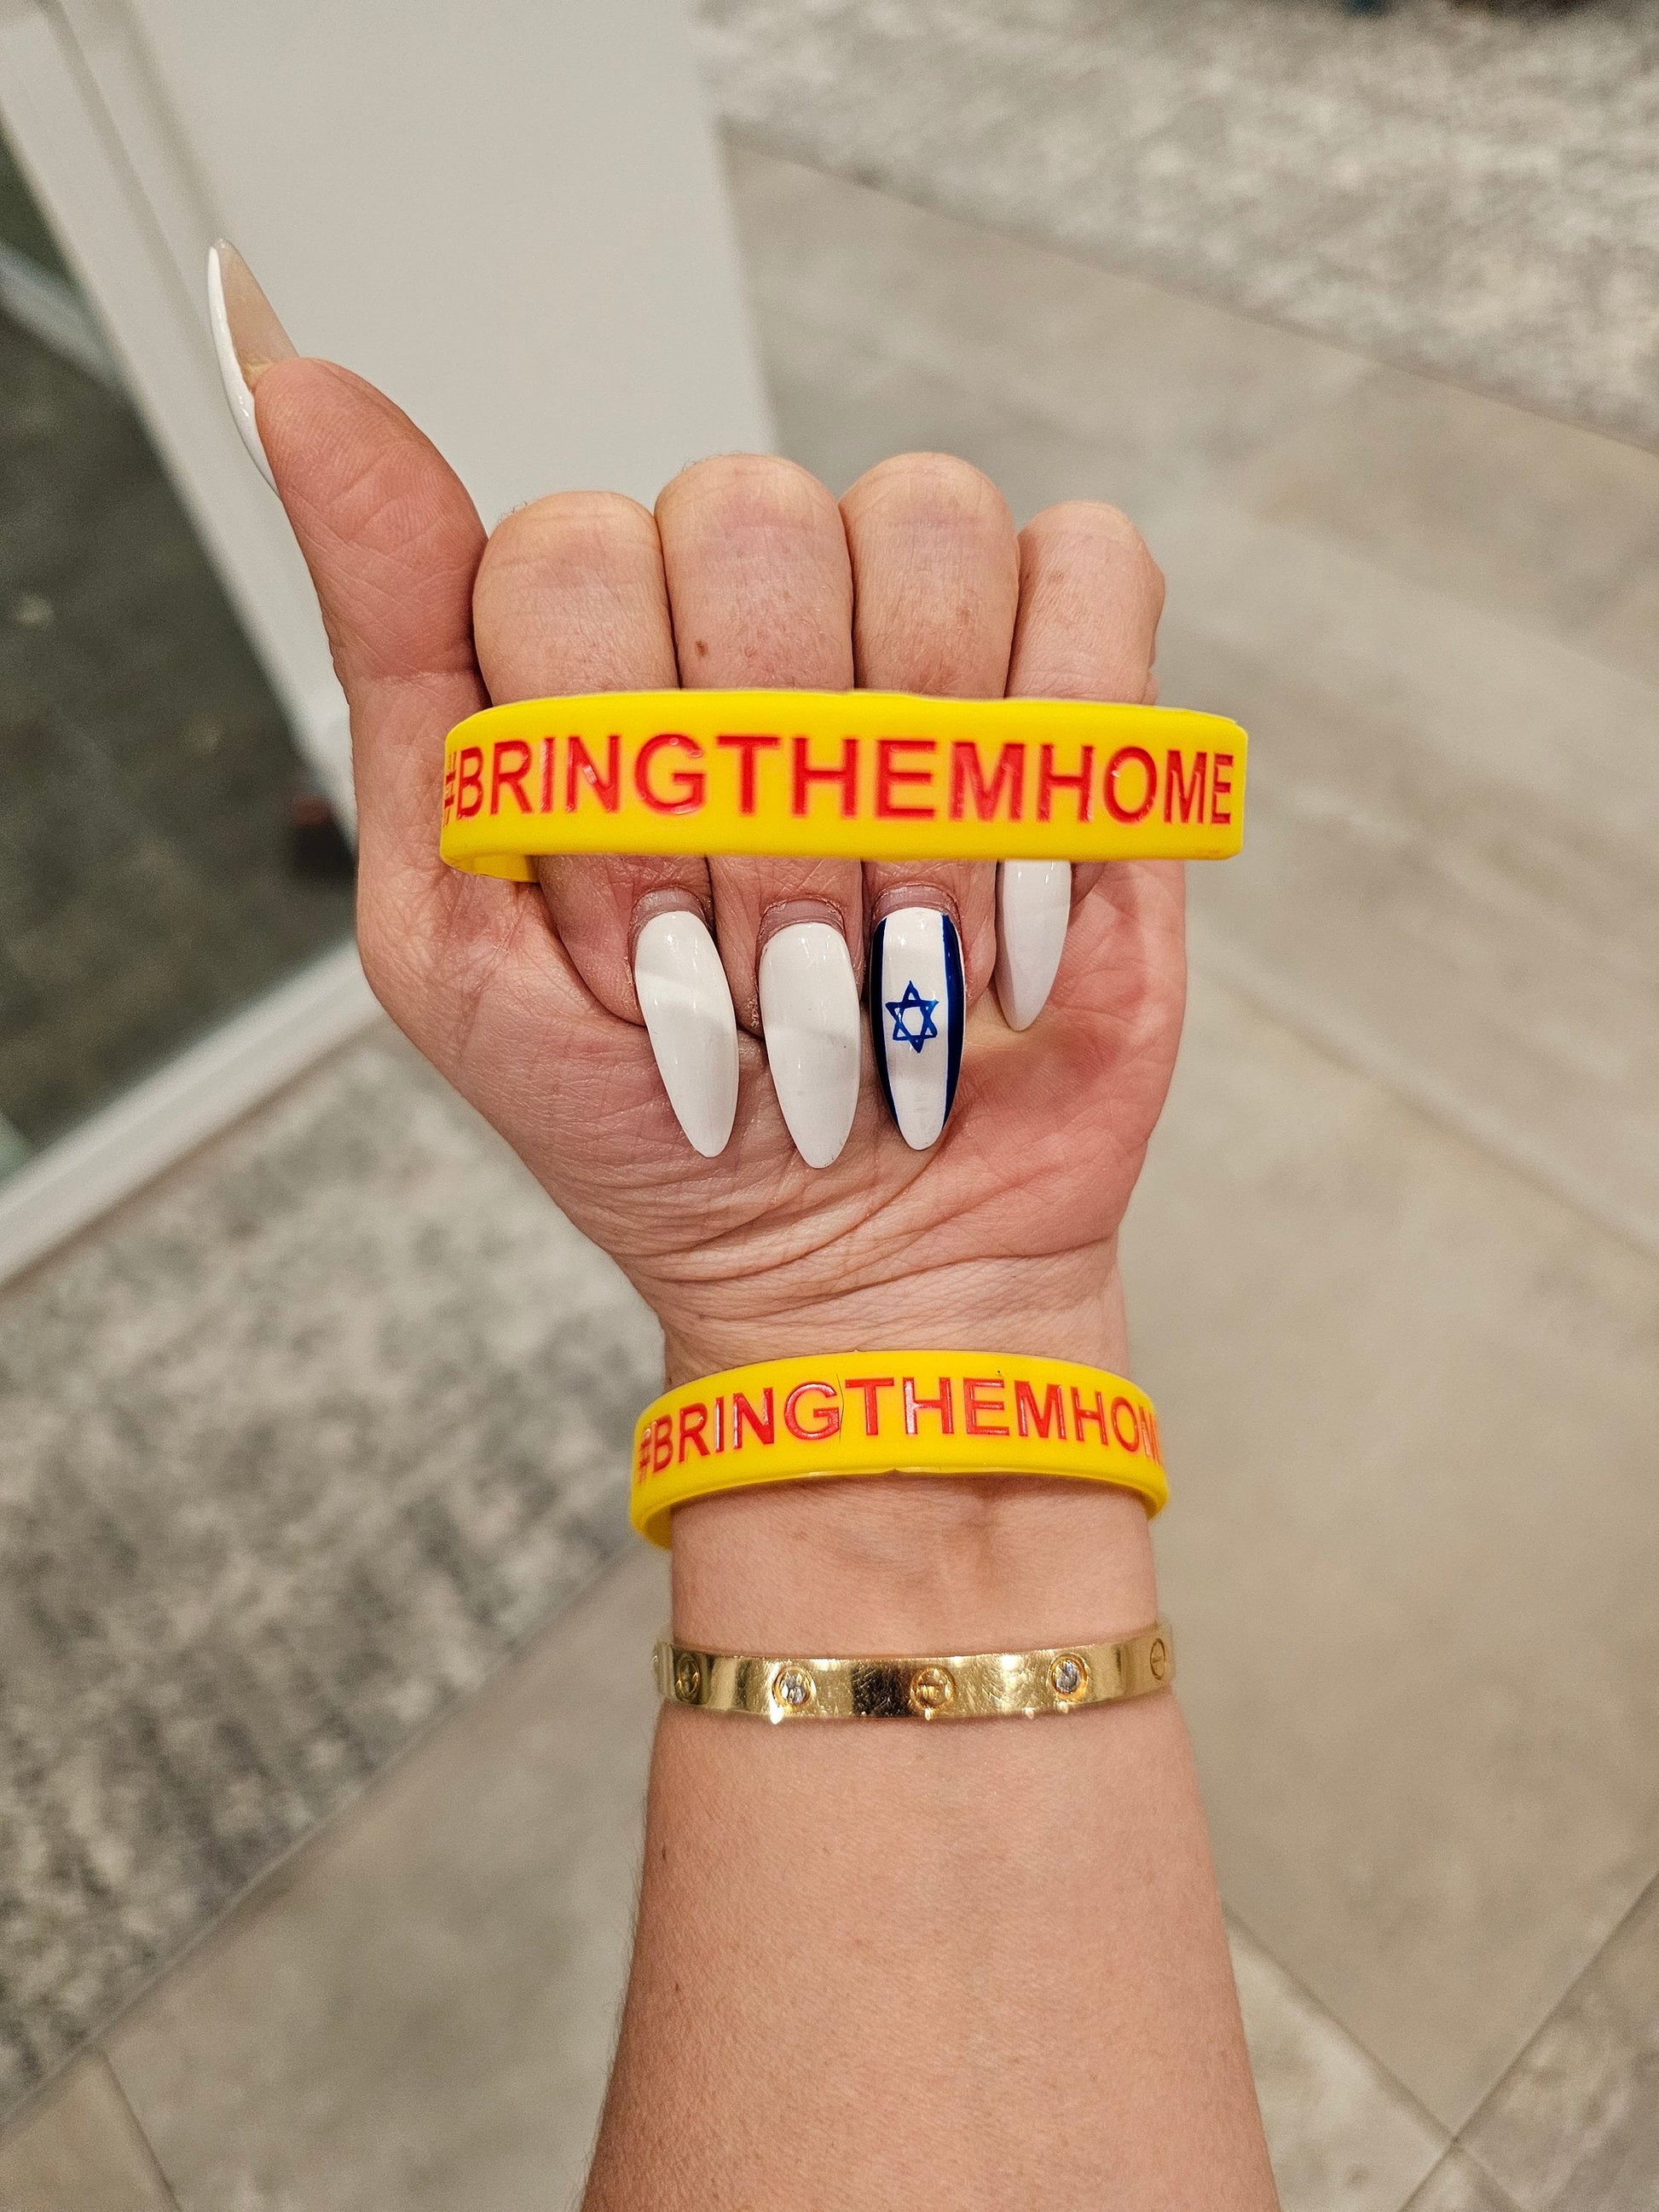 Silicone wristbands with #bringthemhome engraved on it